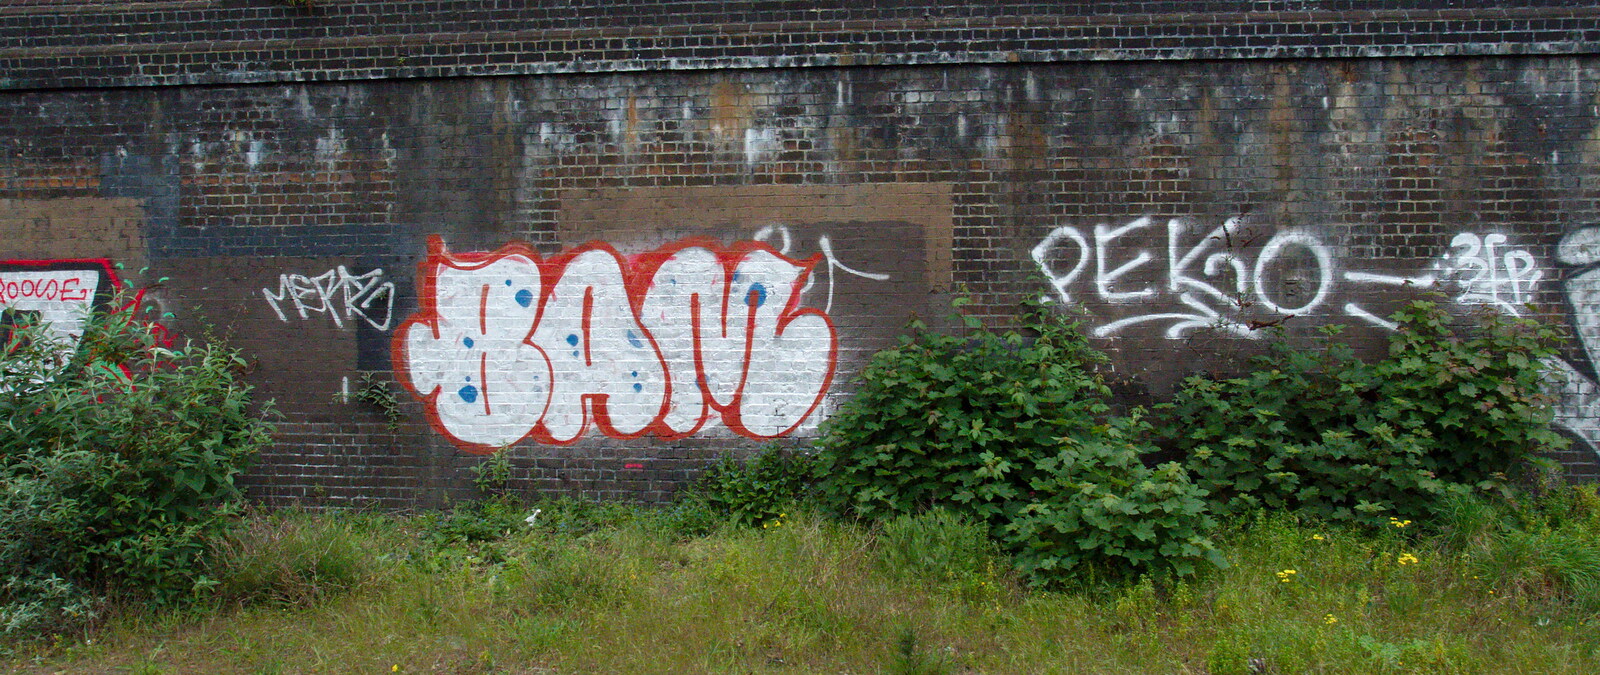 A big 'Bam' tag from Brantham Dereliction, and a SwiftKey Photoshoot, Suffolk and Southwark - 29th April 2014